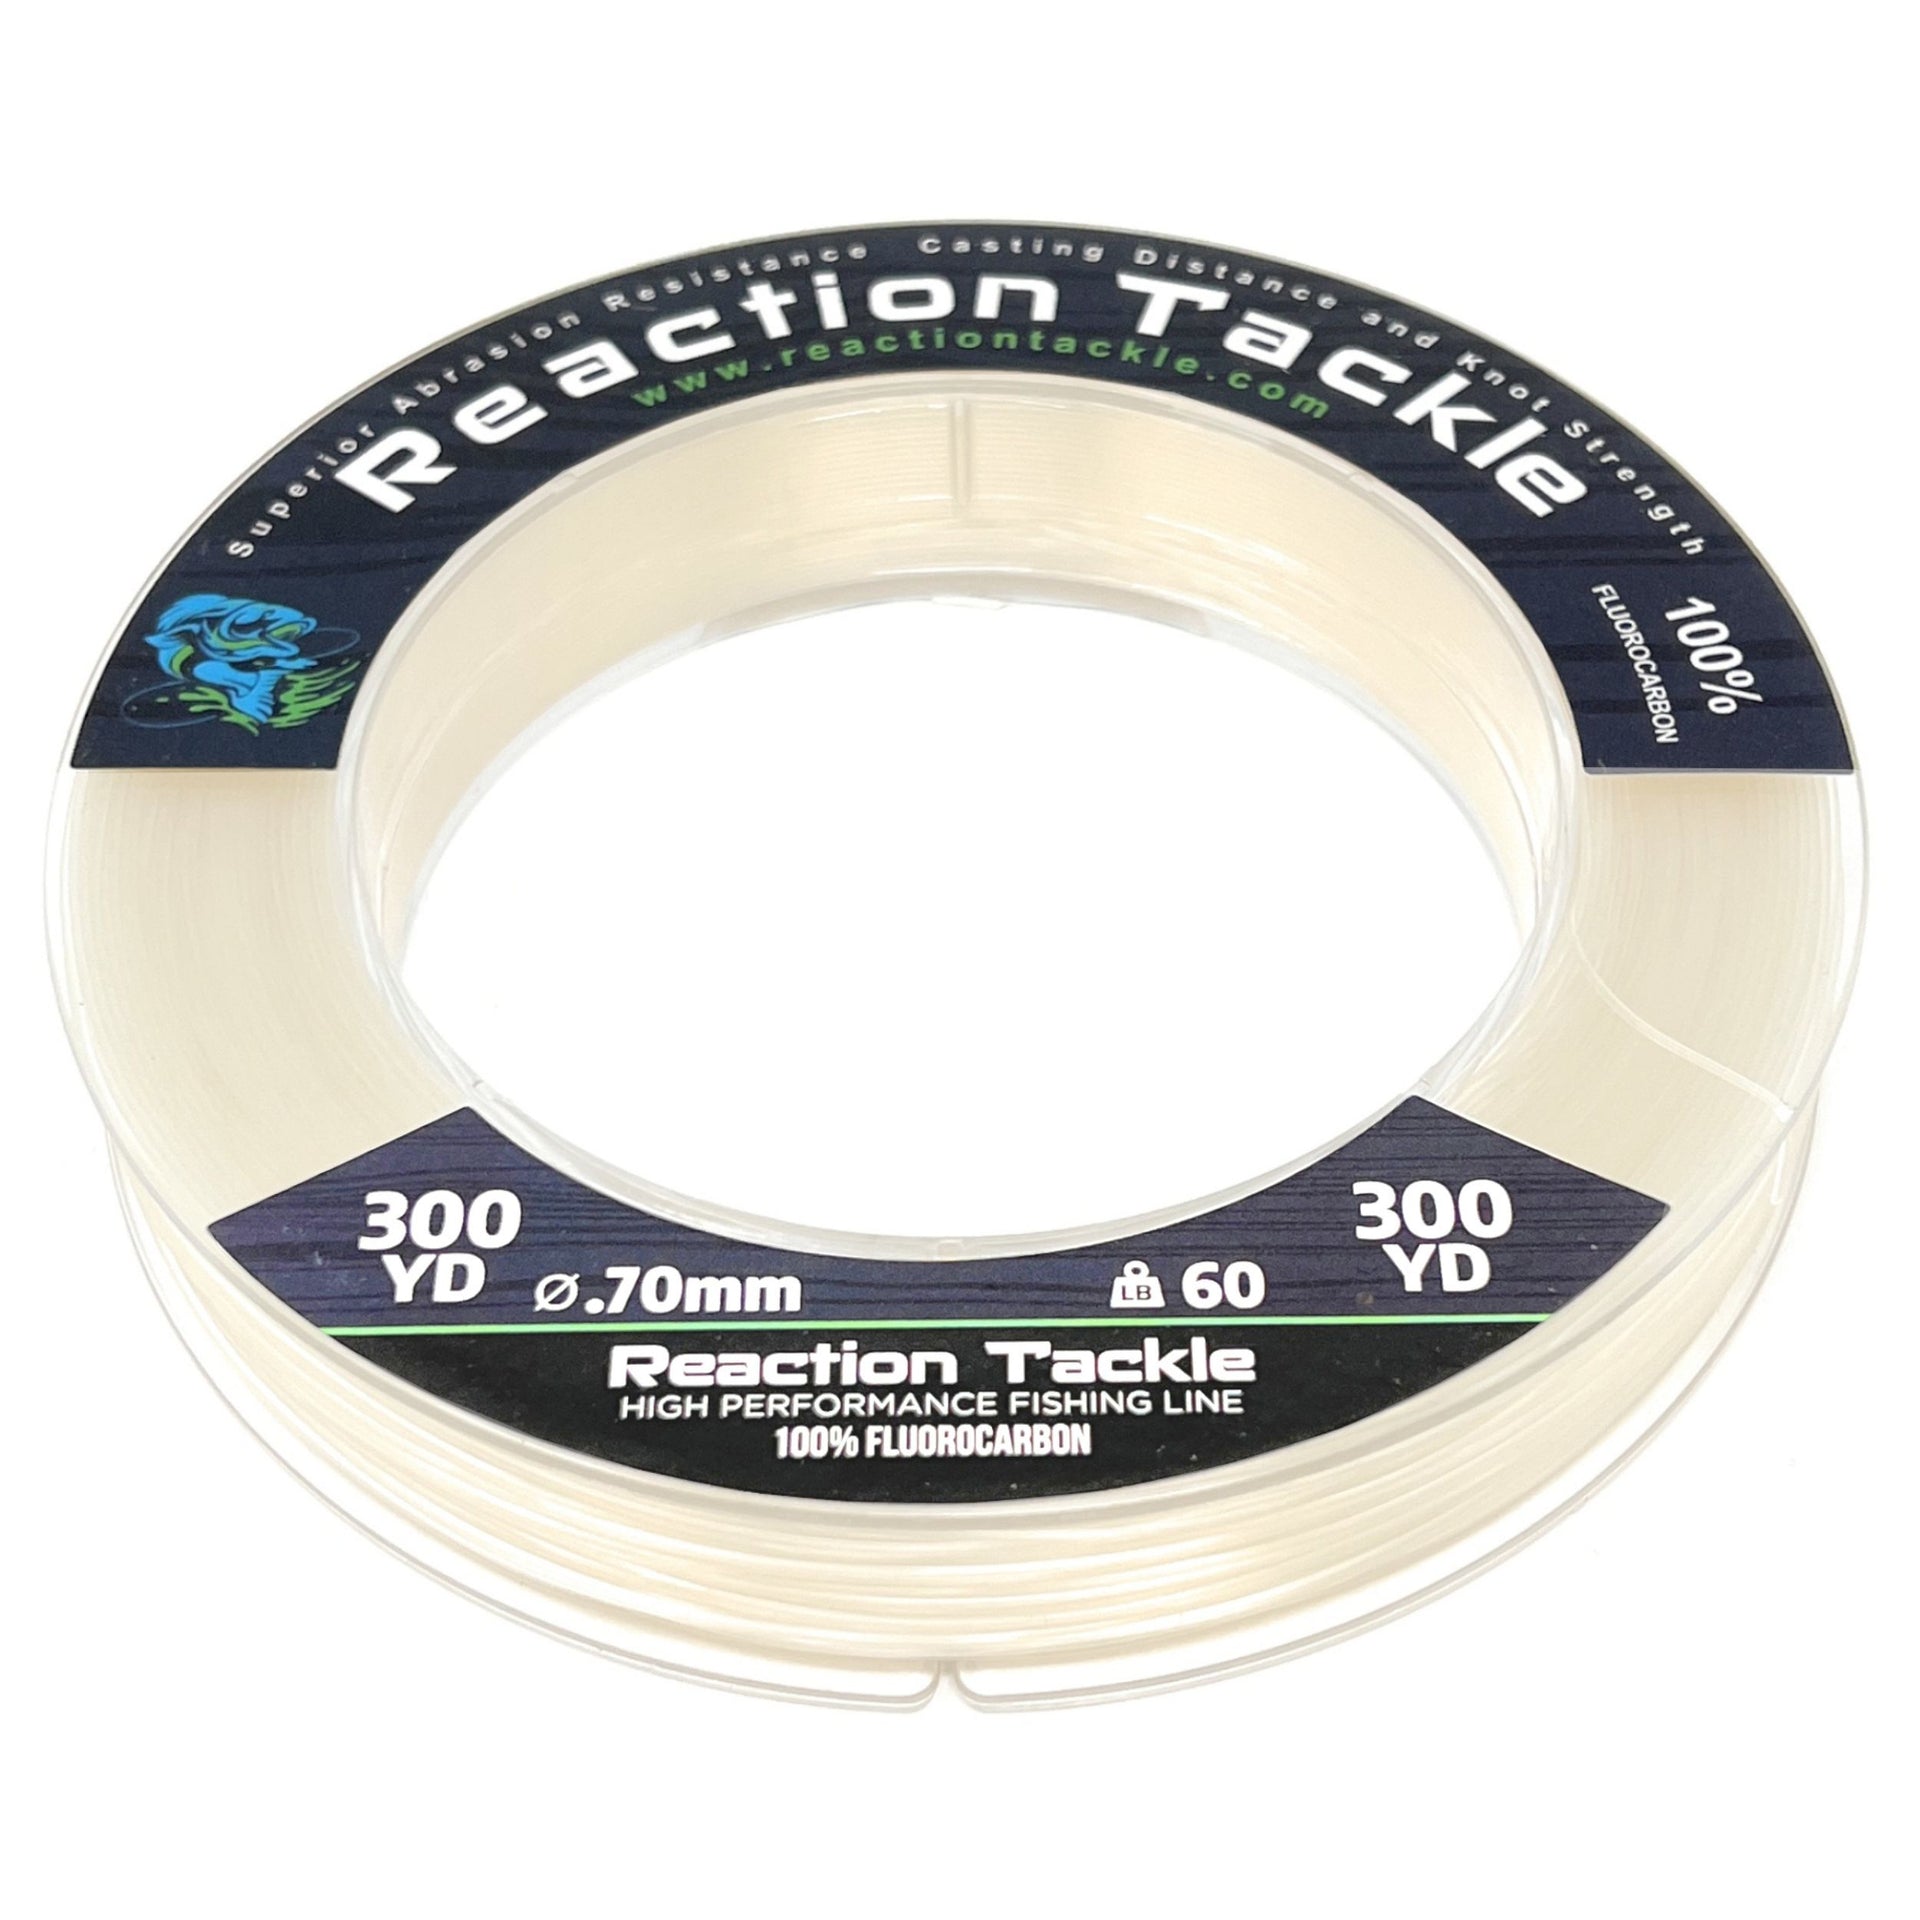  BLUEWING 100% Pure Fluorocarbon Fishing Line 25yd